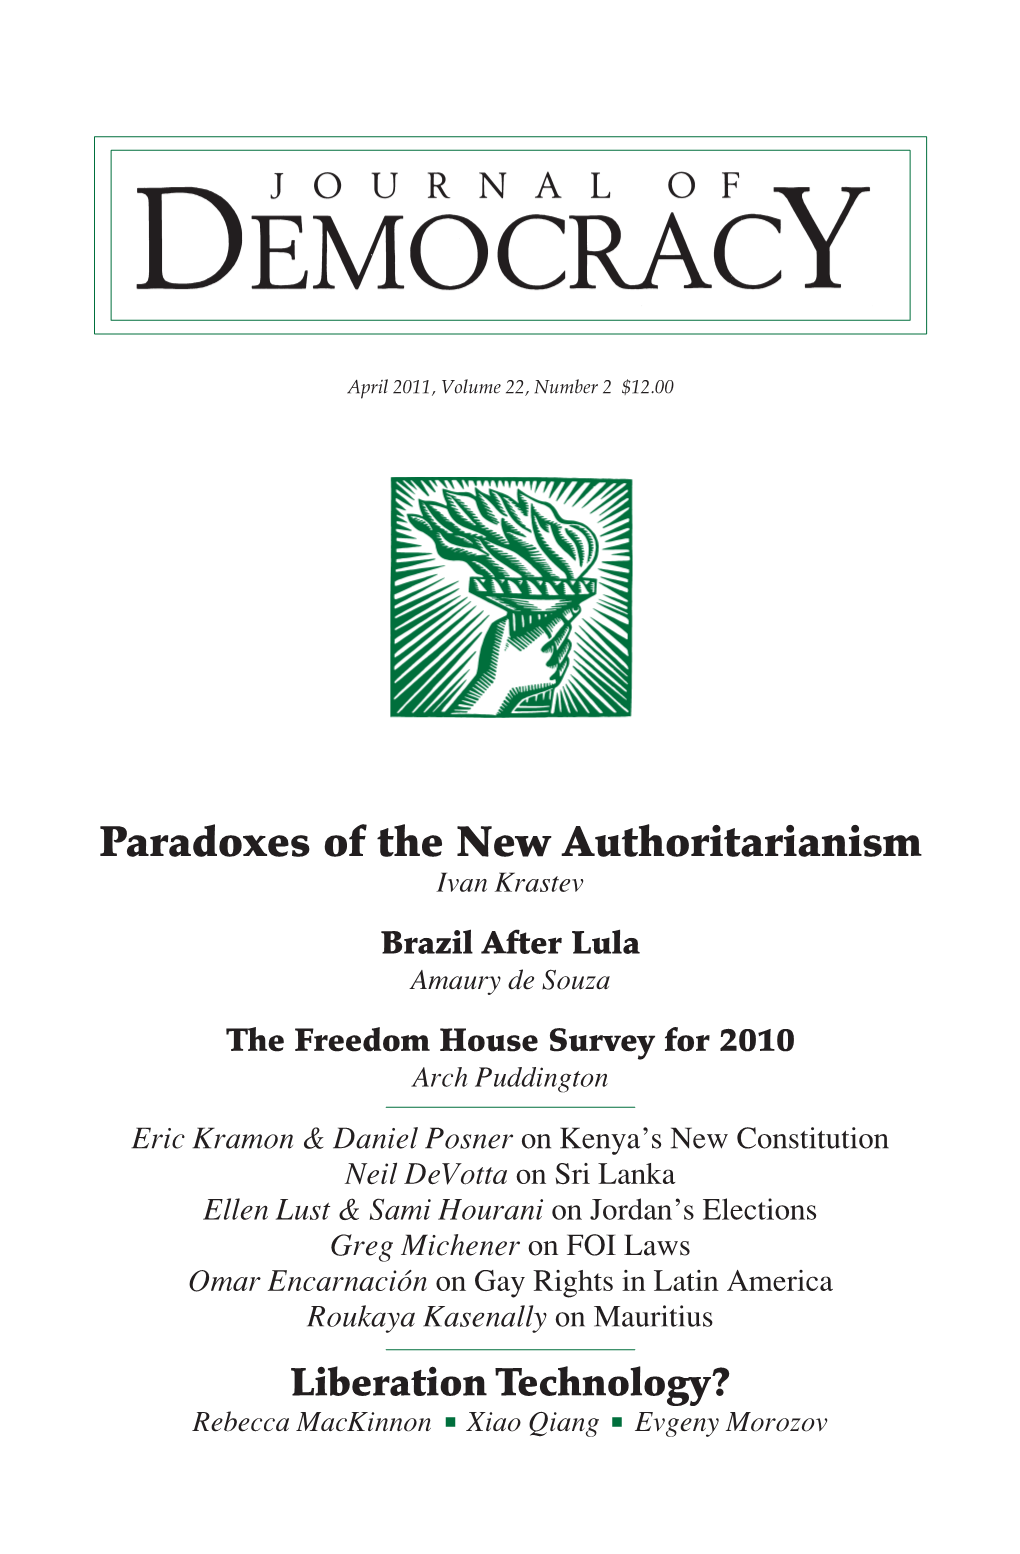 Paradoxes of the New Authoritarianism Ivan Krastev Brazil After Lula Amaury De Souza the Freedom House Survey for 2010 Arch Puddington